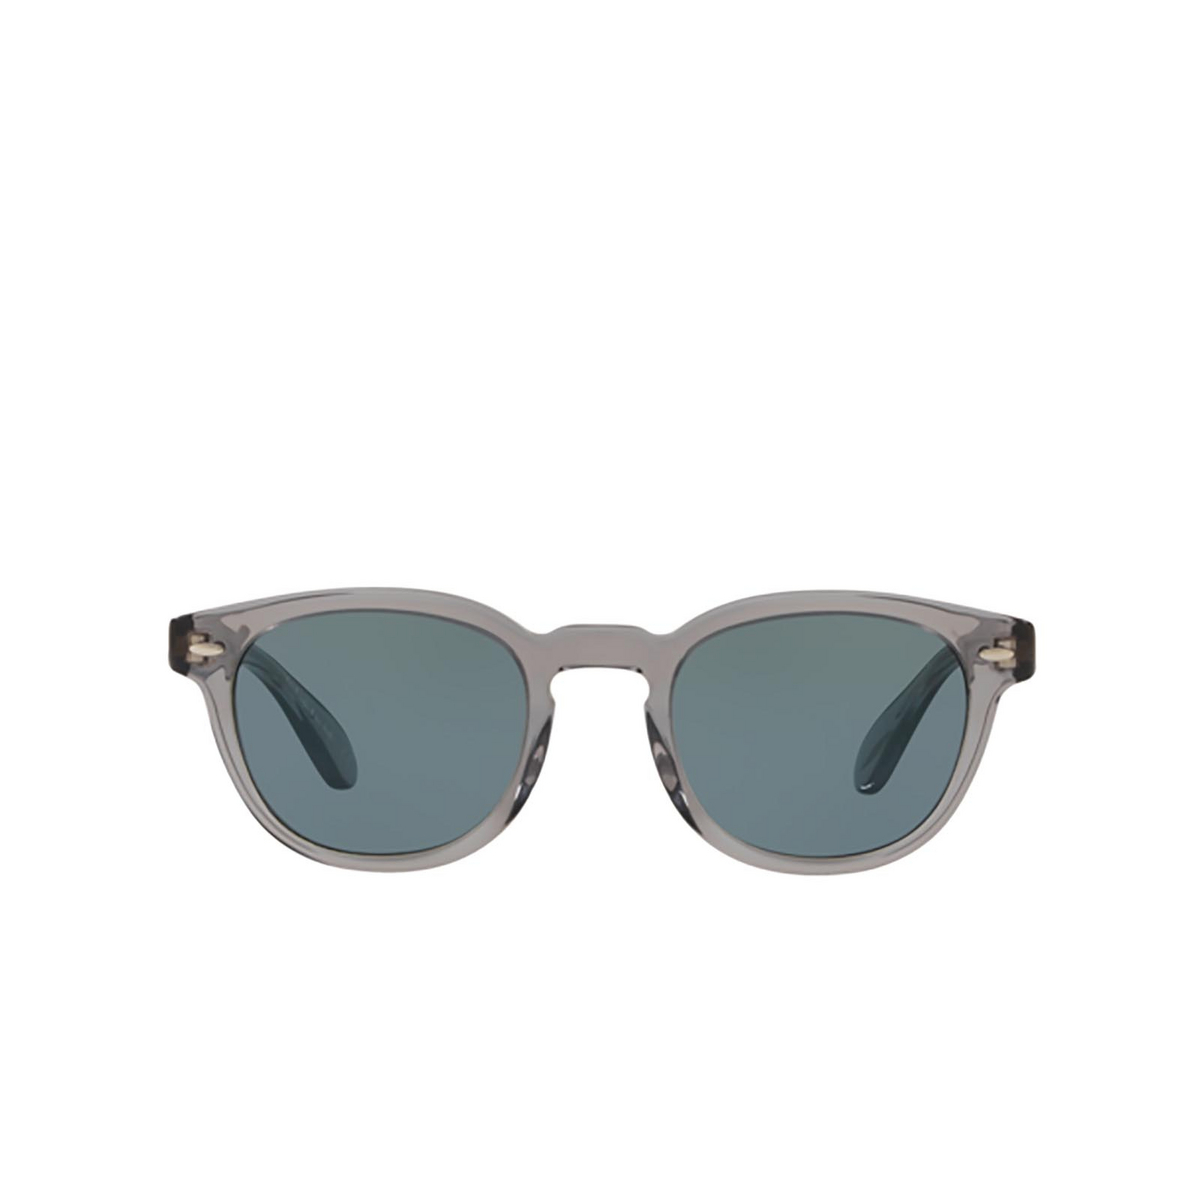 Oliver Peoples SHELDRAKE Sunglasses 1132R8 Workman Grey - front view